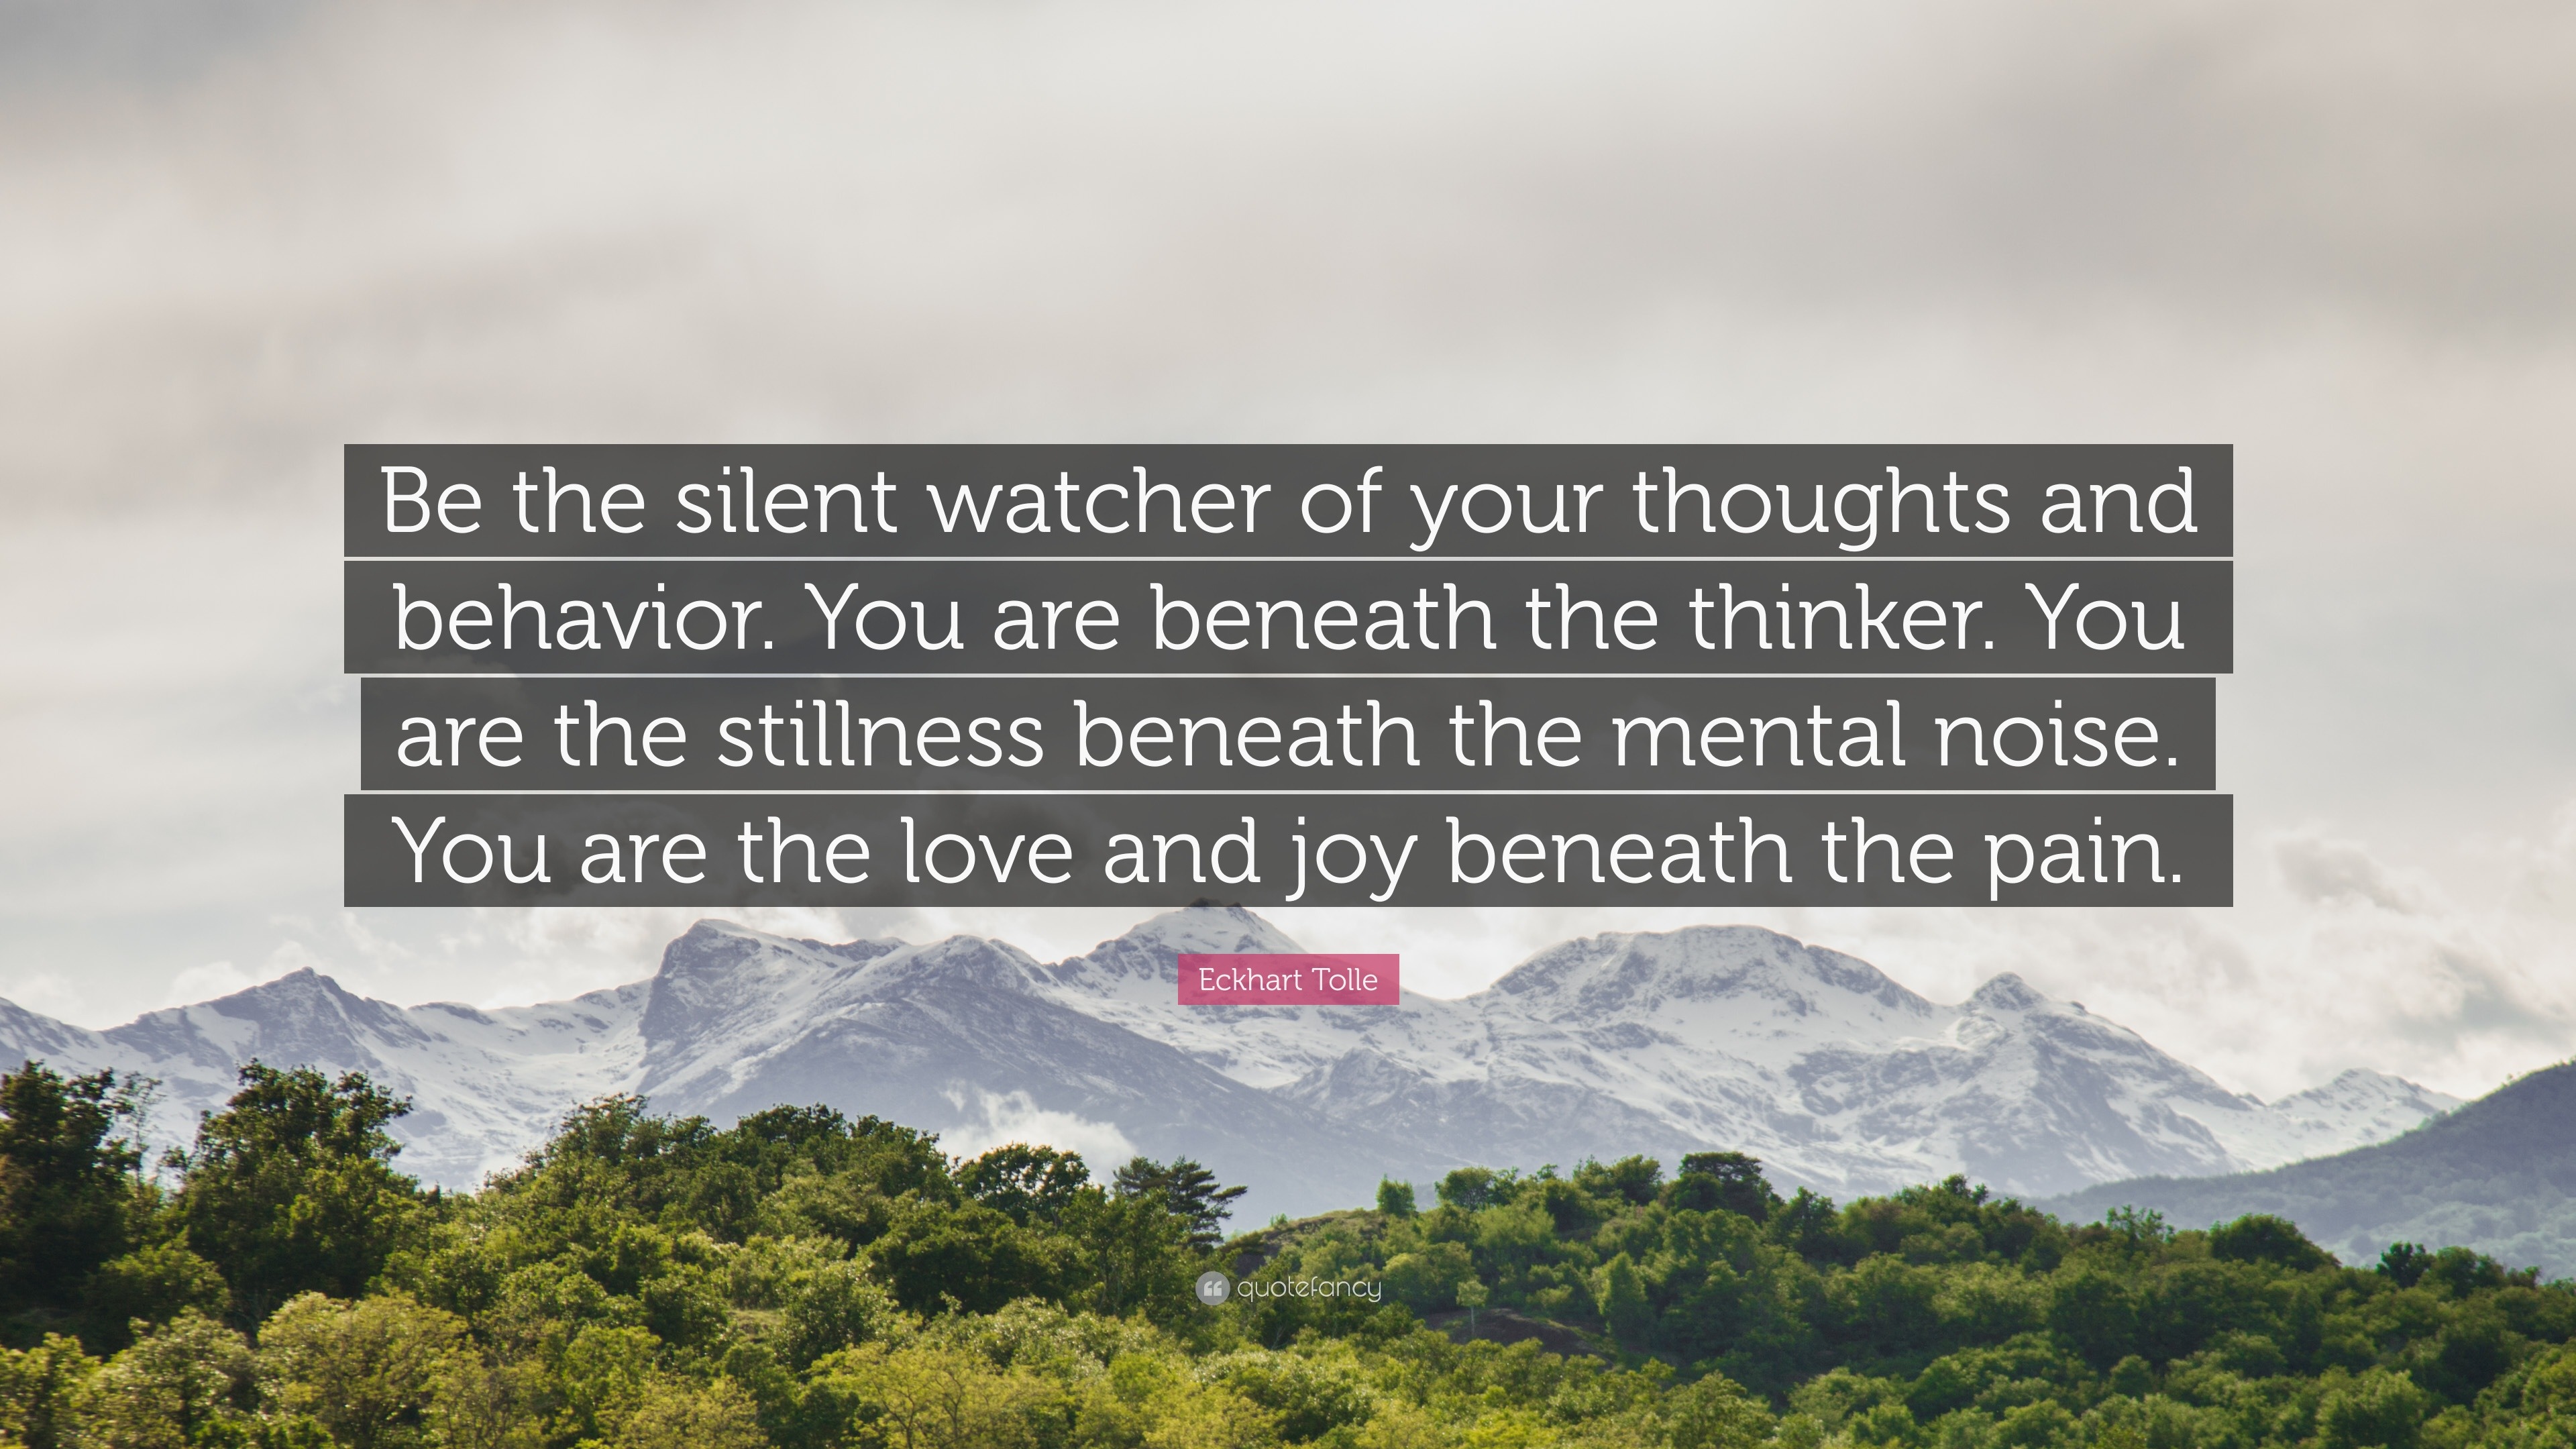 Mindfulness Quotes “Be the silent watcher of your thoughts and behavior You are